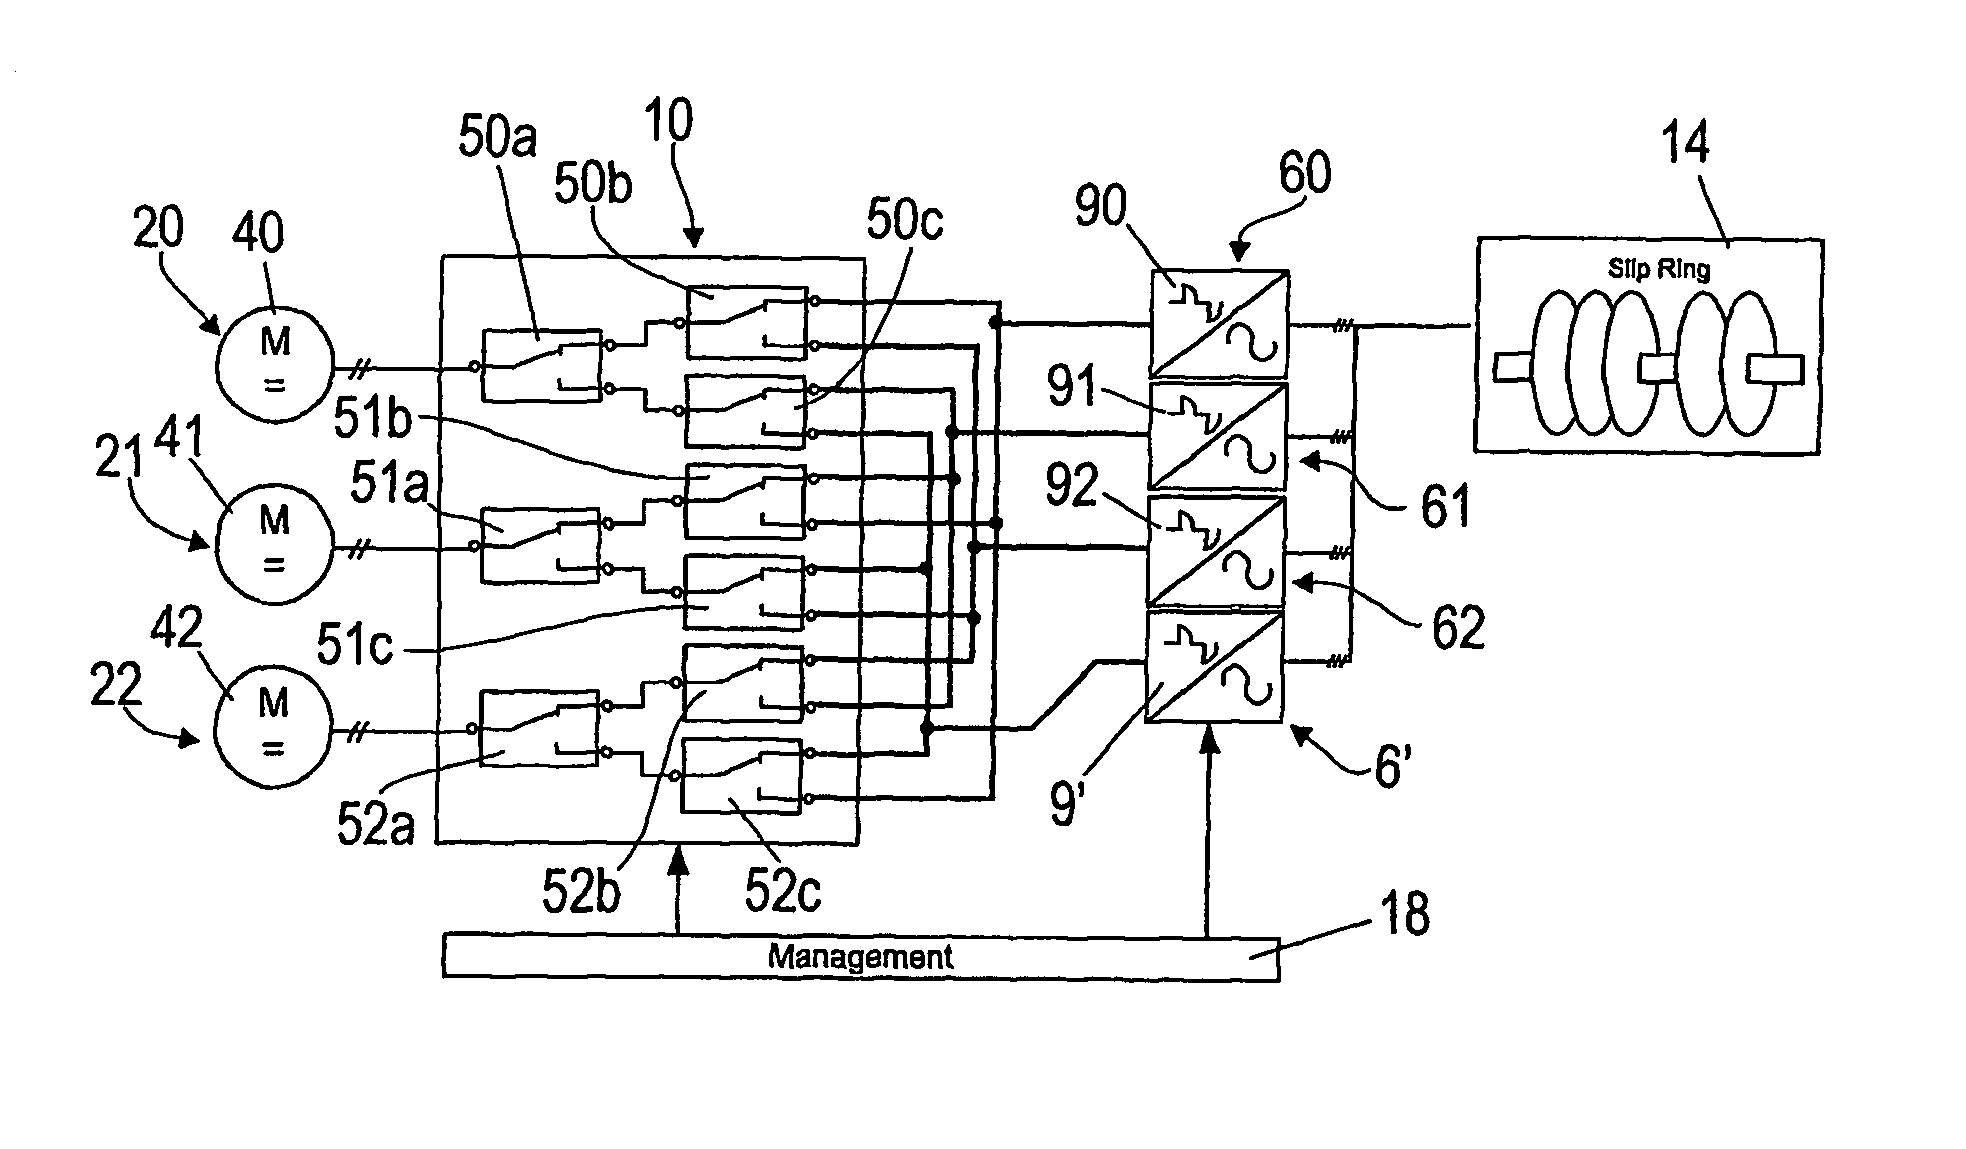 Redundant Blade Pitch Control System for a Wind Turbine and Method for Controlling a Wind Turbine